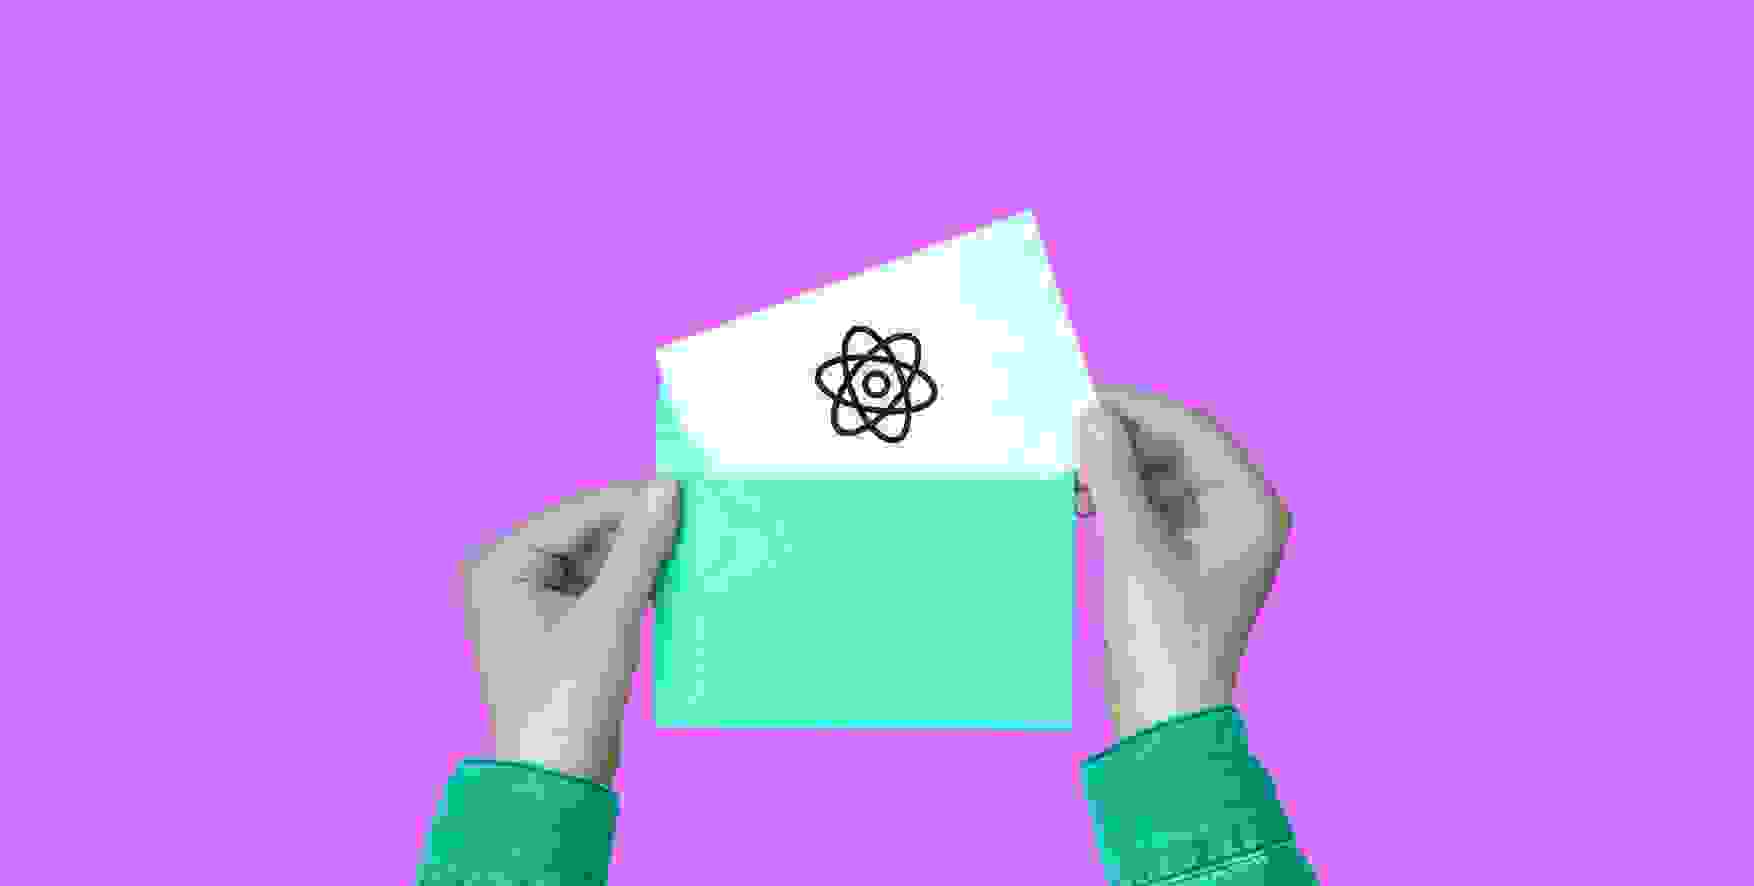 a sheet of paper with a symbol of React JS in an envelope